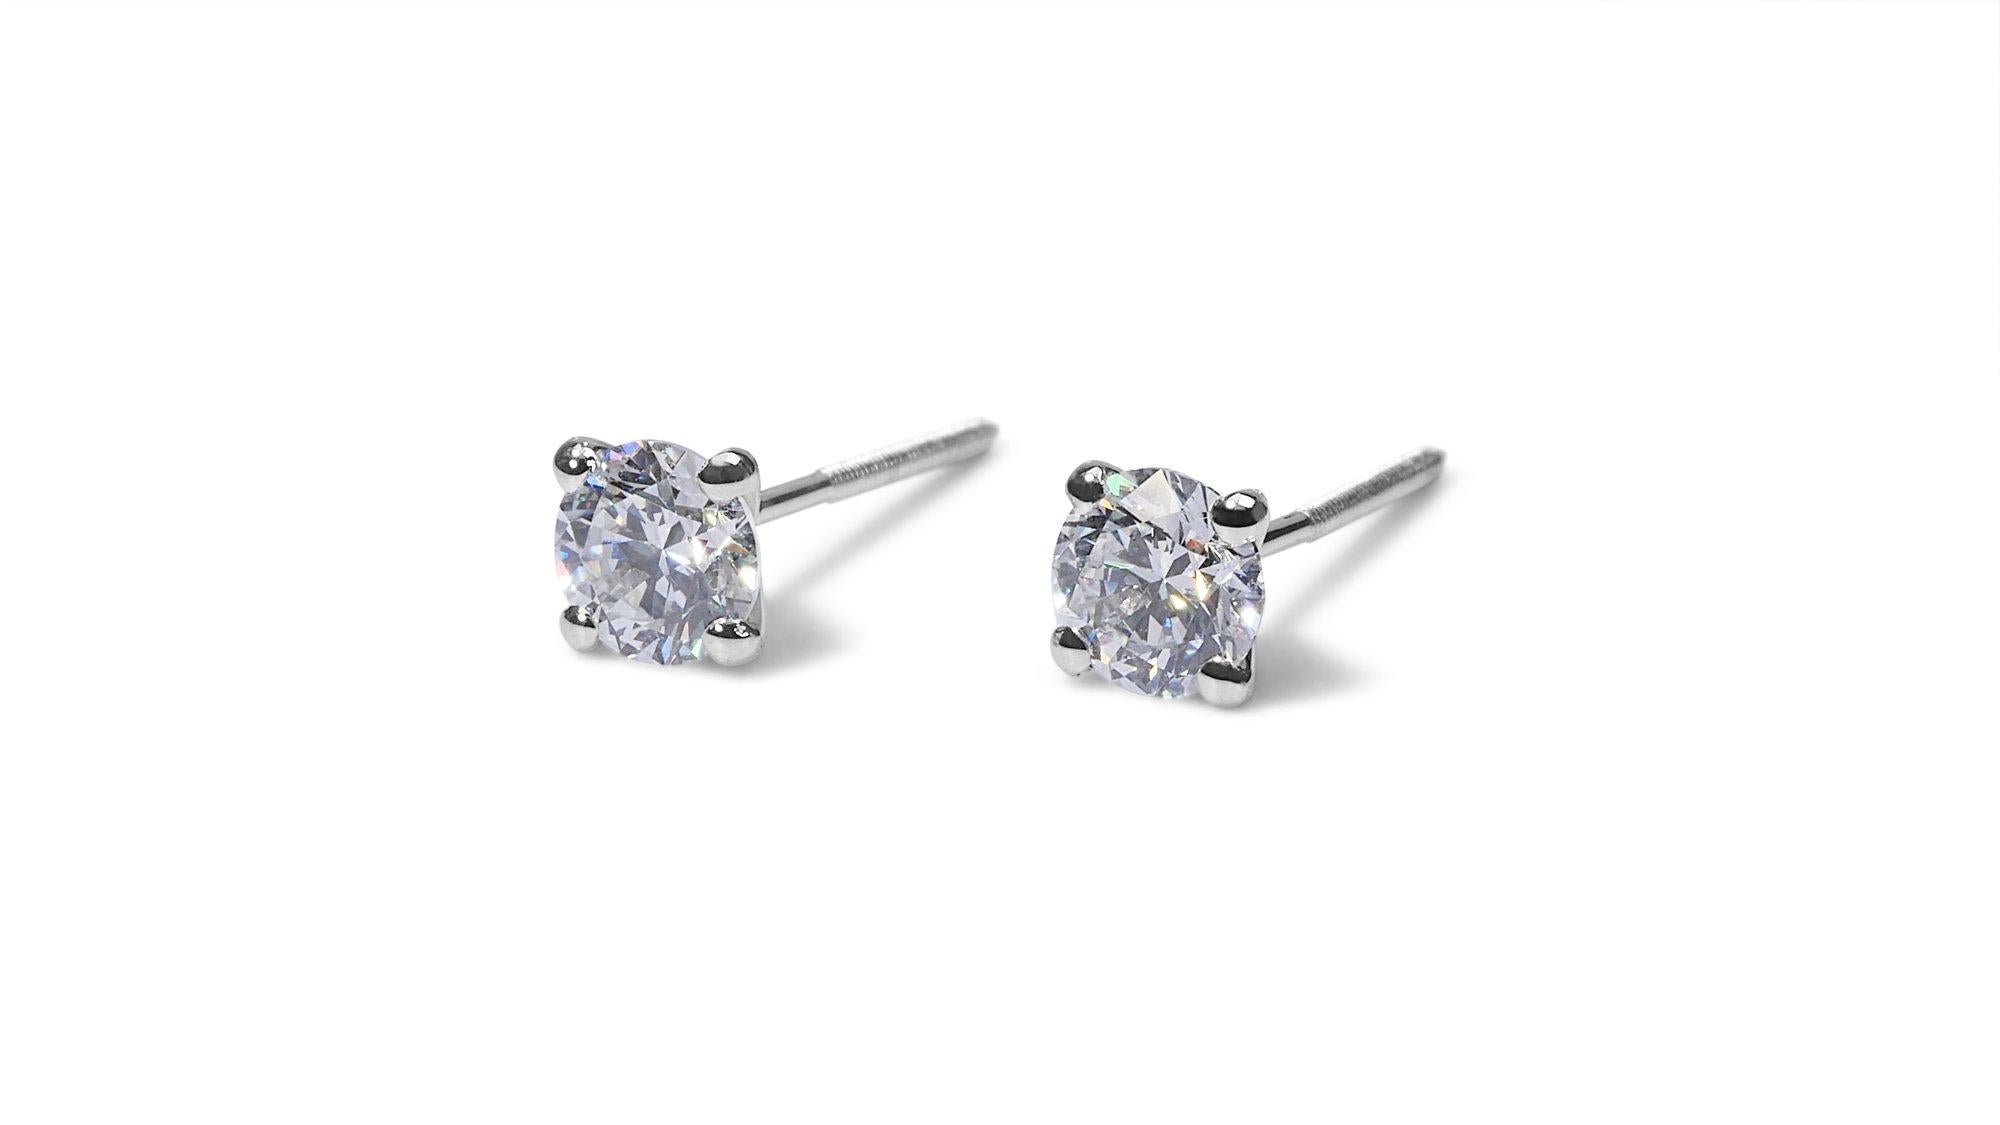 Women's Gorgeous 18k White Gold Stud Earrings with 0.80 ct Natural Diamonds GIA Cert For Sale